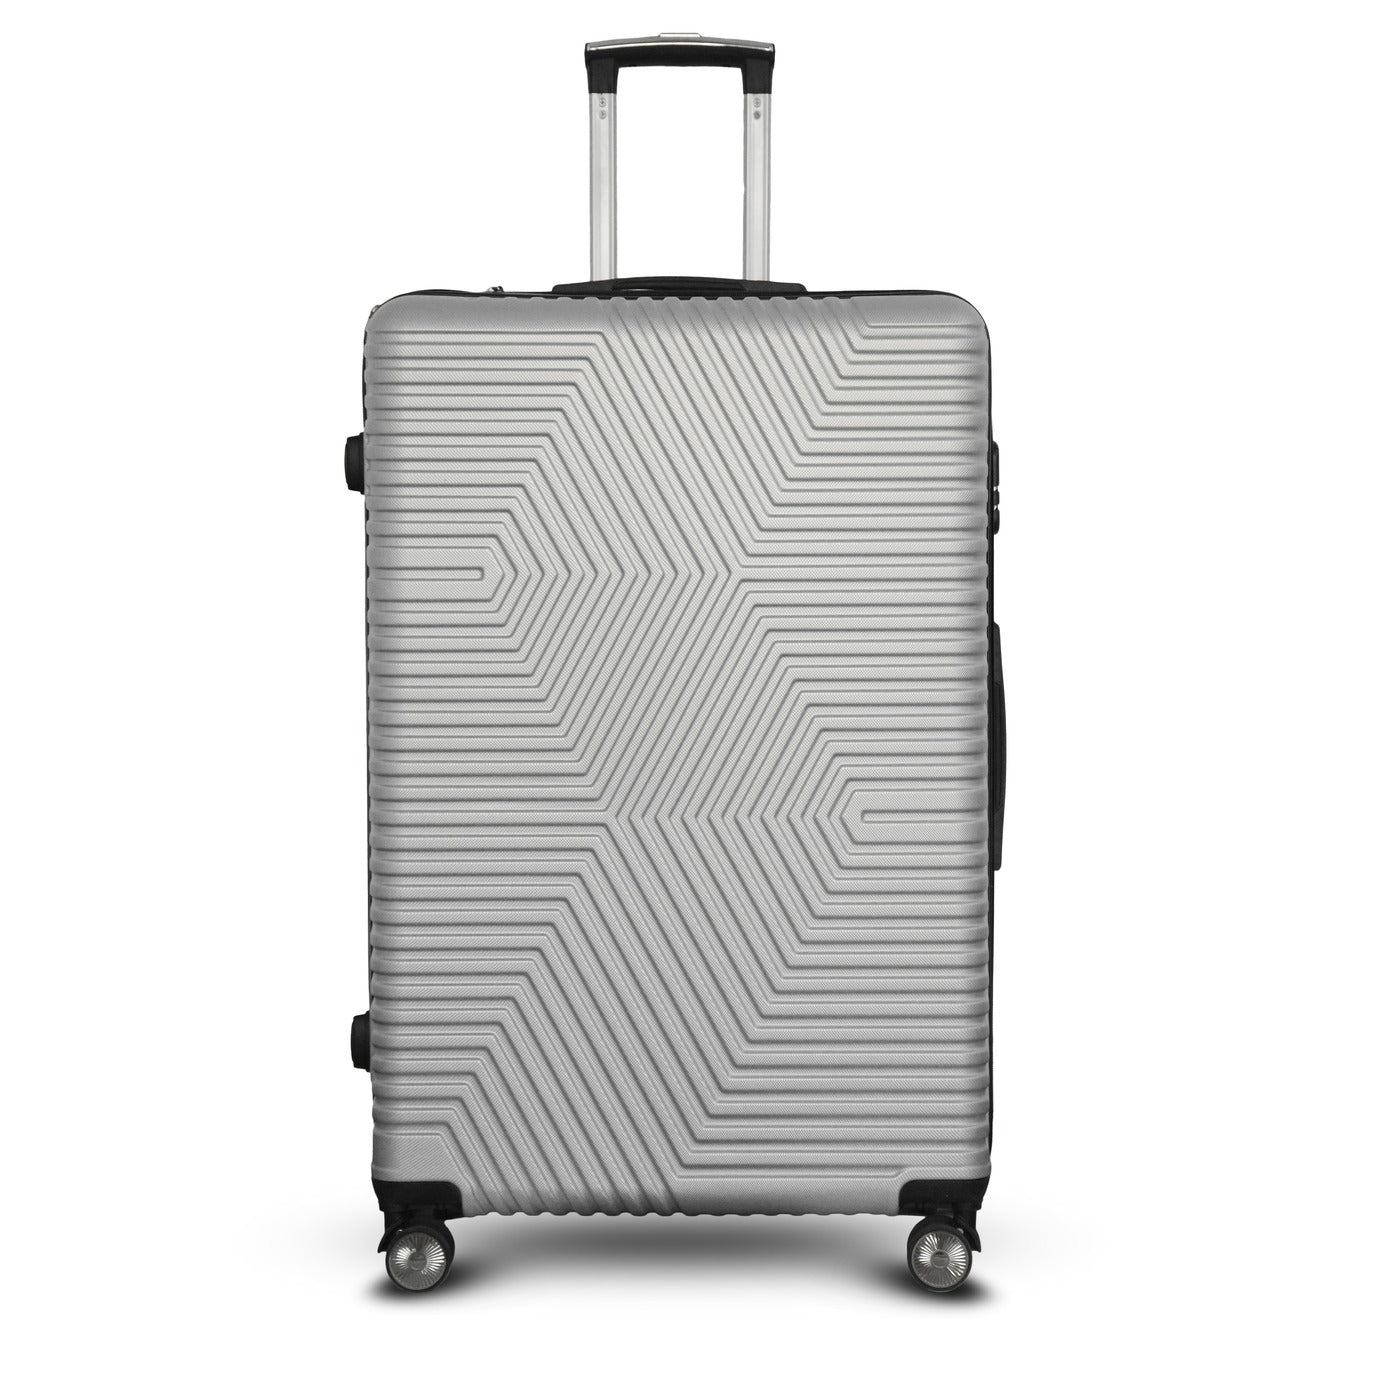 Zig Zag ABS Lightweight Luggage Bag With Double Spinner Wheel Zaappy